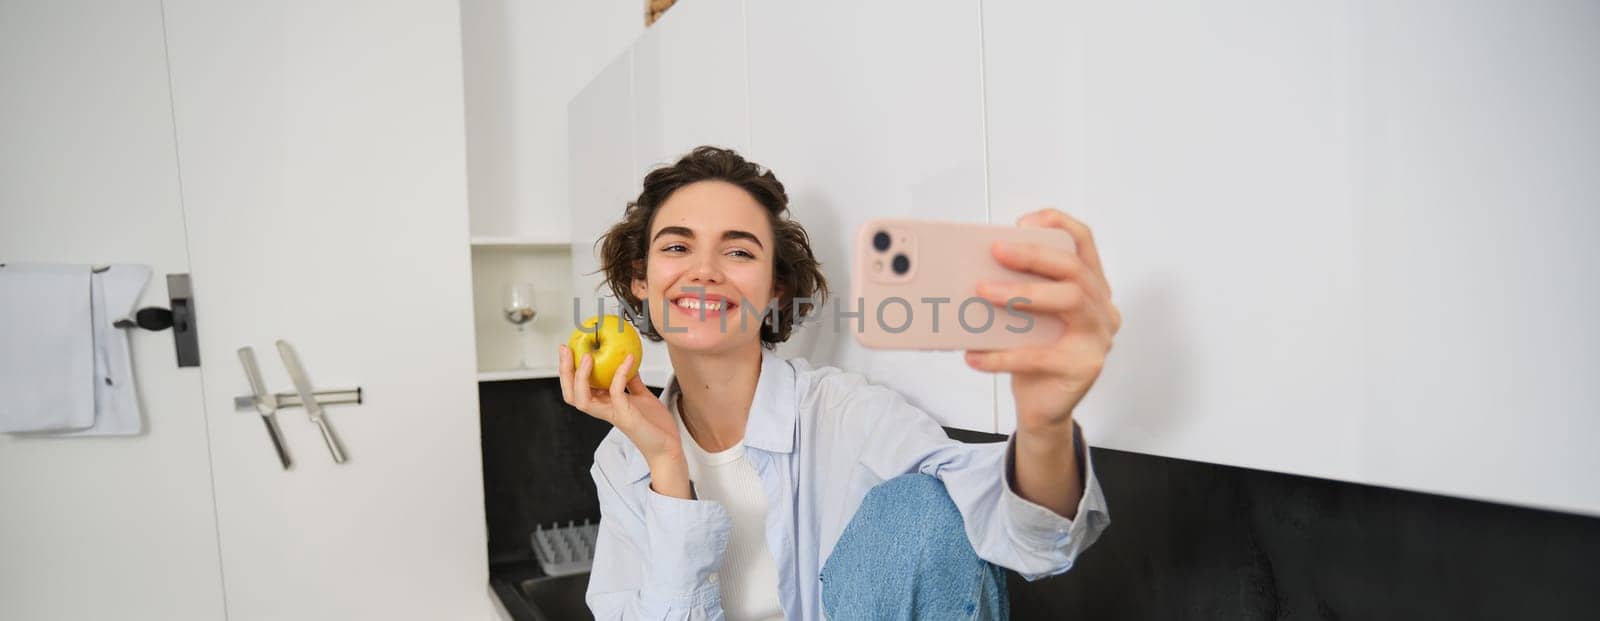 Beautiful girl blogger, takes selfie as she eats apple, shows how to lead healthy lifestyle to followers online, holds smartphone for photo.